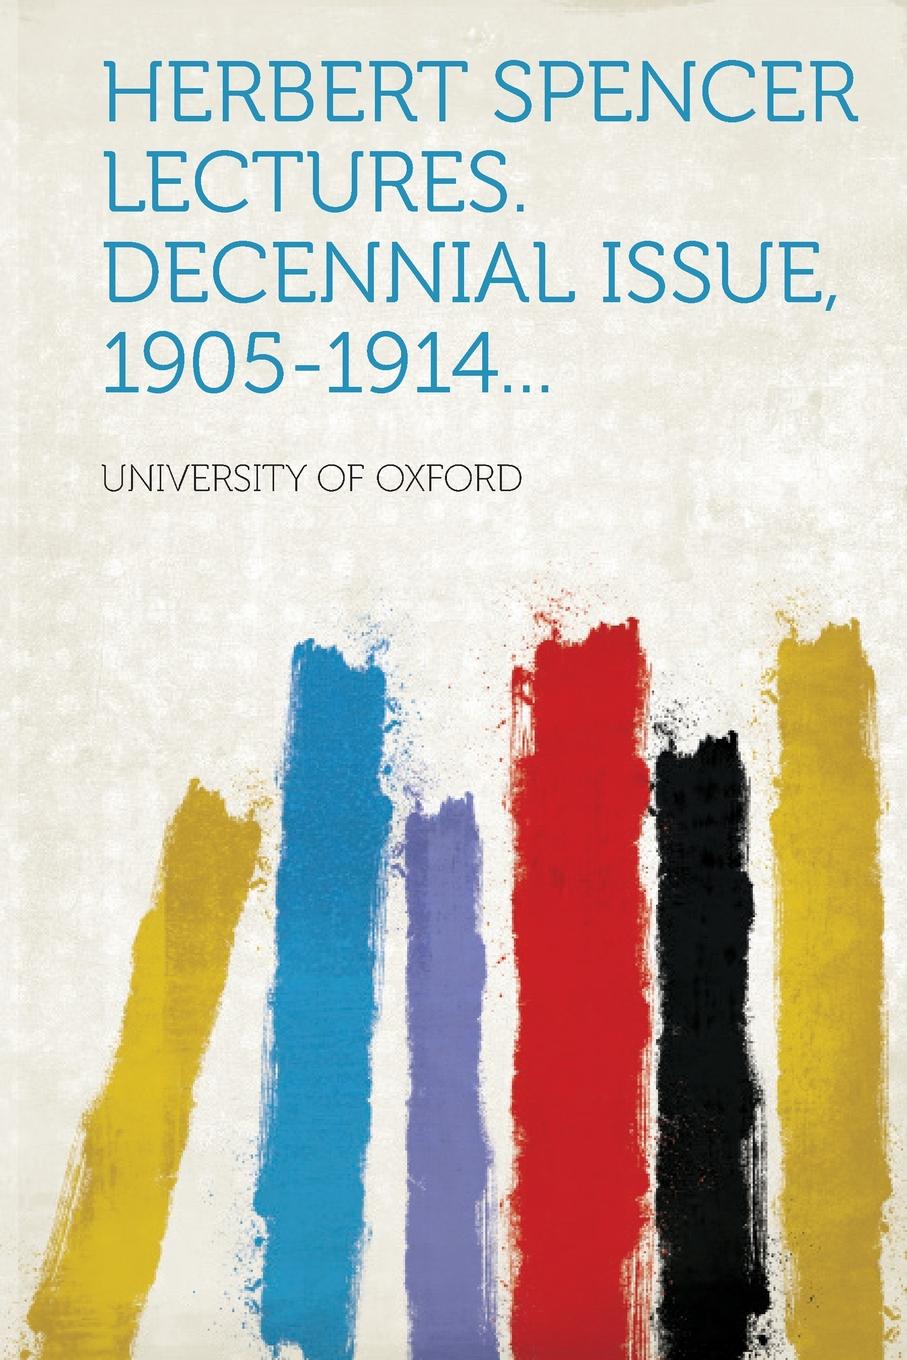 фото Herbert Spencer Lectures. Decennial Issue, 1905-1914...